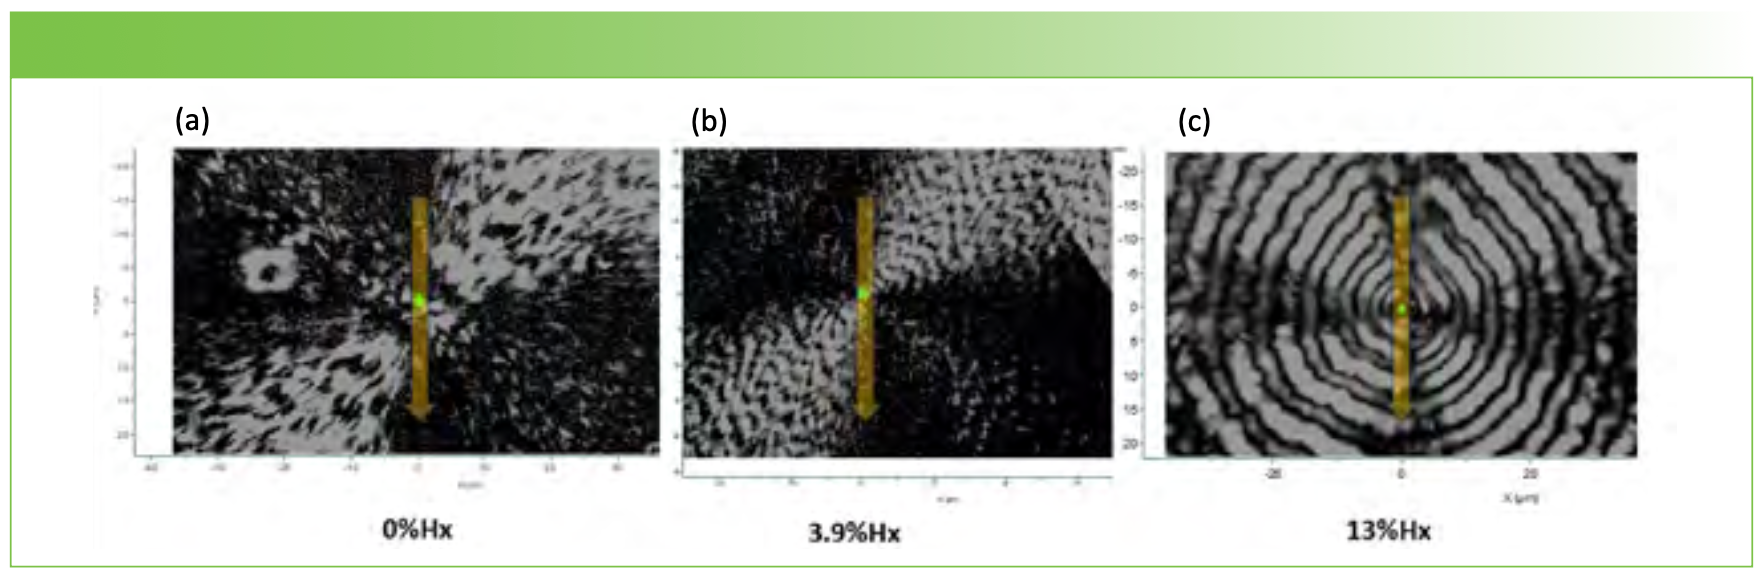 FIGURE 1: Crossed polarizer images of spherulites of PHBHx used for the Raman polarization measurements along a vertical line profile through the middle of the spherulite. From left to right the hydroxyhexanoate composition was (a) 0, (b) 3.9, and (c) 13 %. X- and Y-axes labels are spatial coordinates in μm.